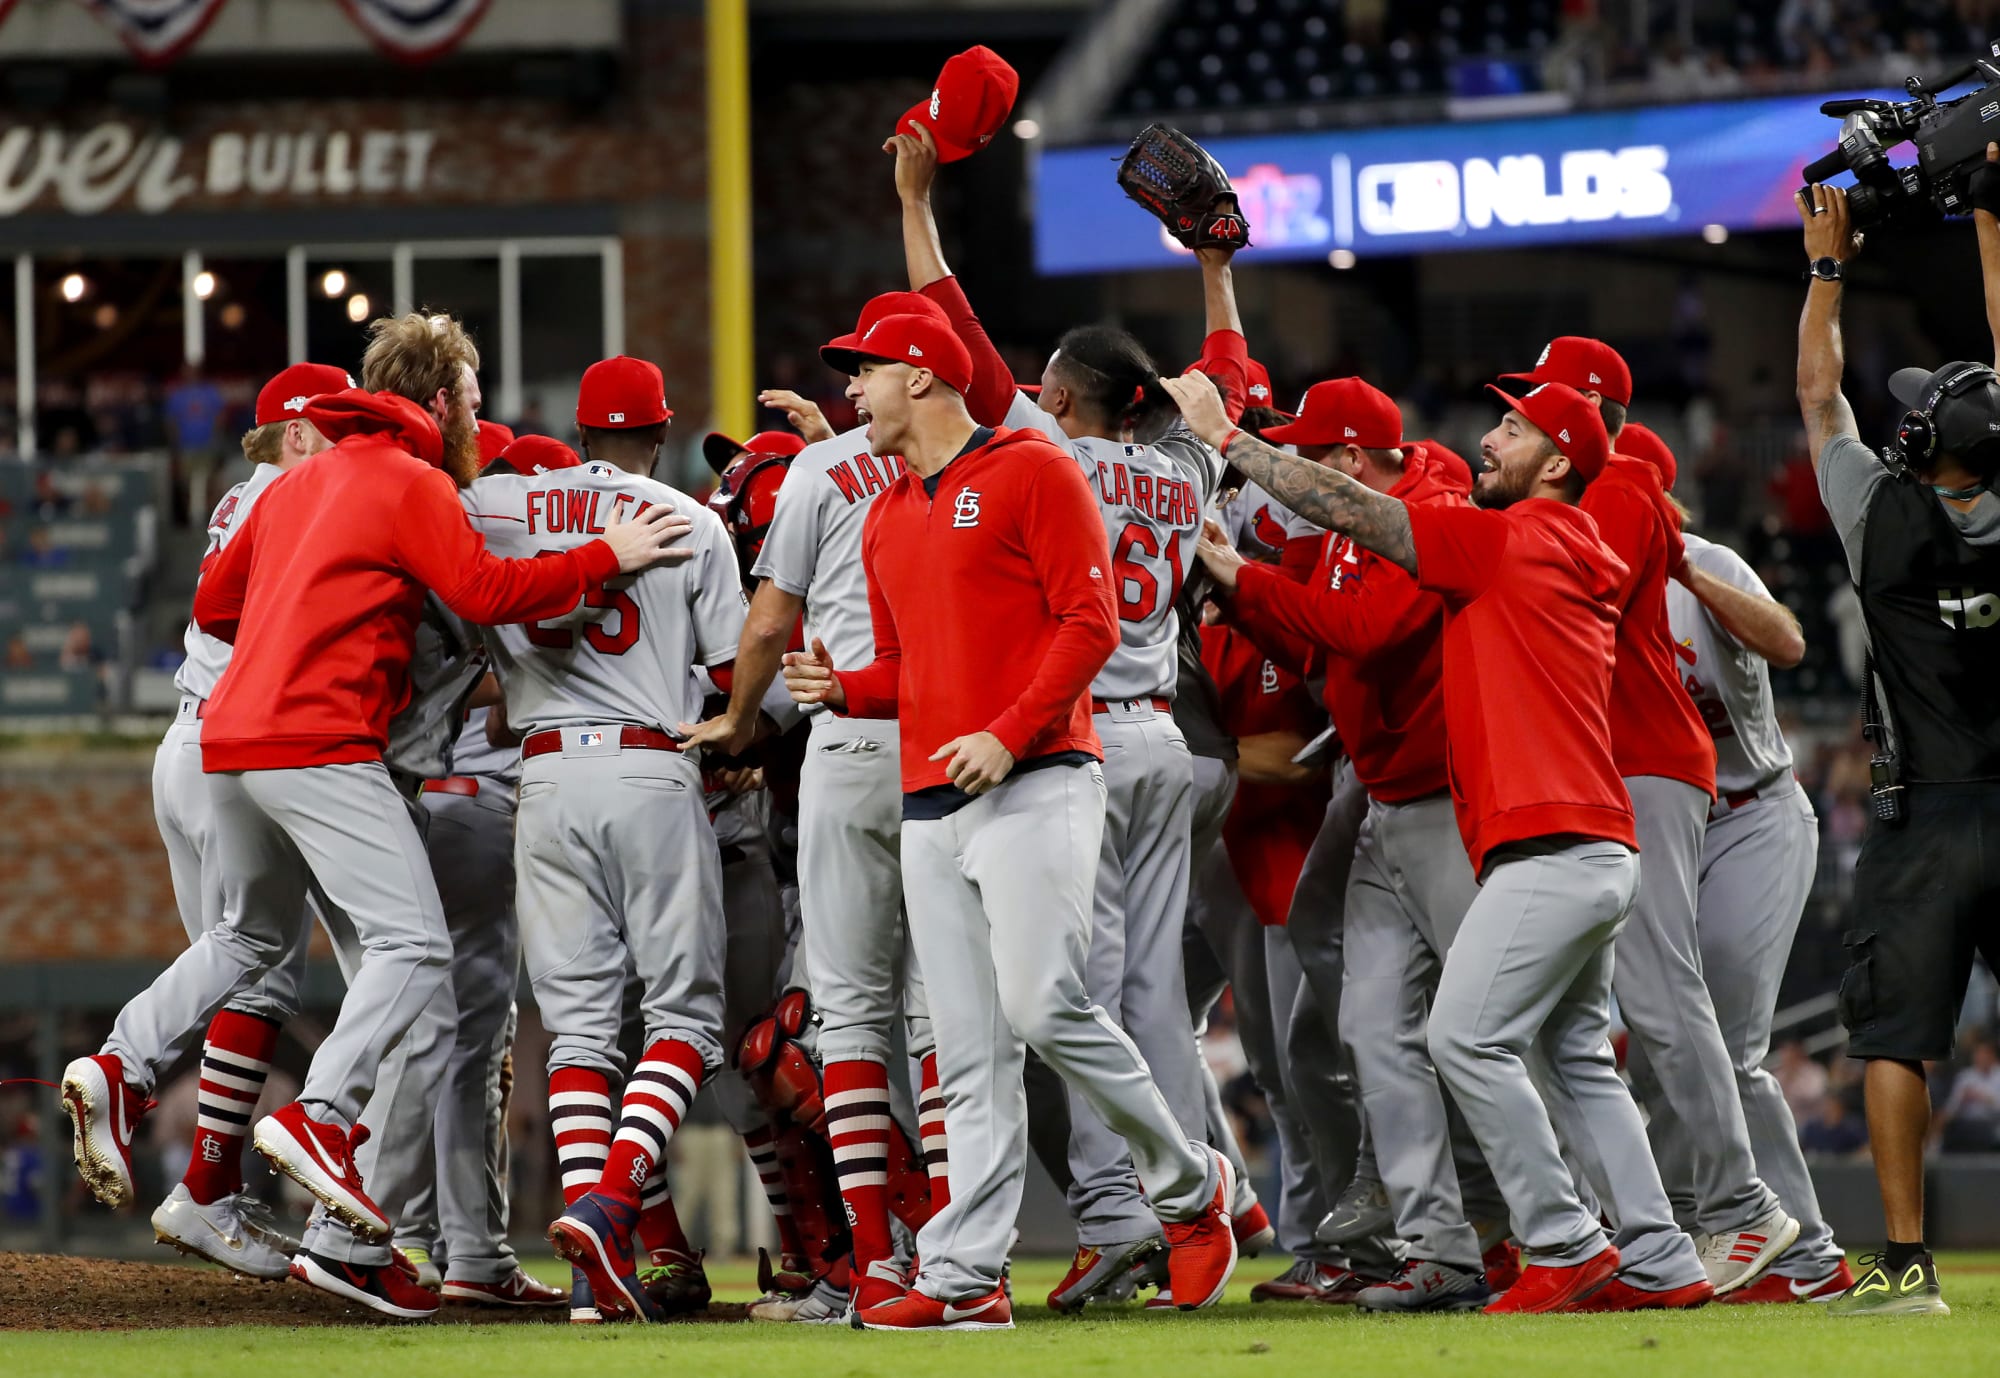 St. Louis Cardinals: The team is sticking with what worked for the NLCS